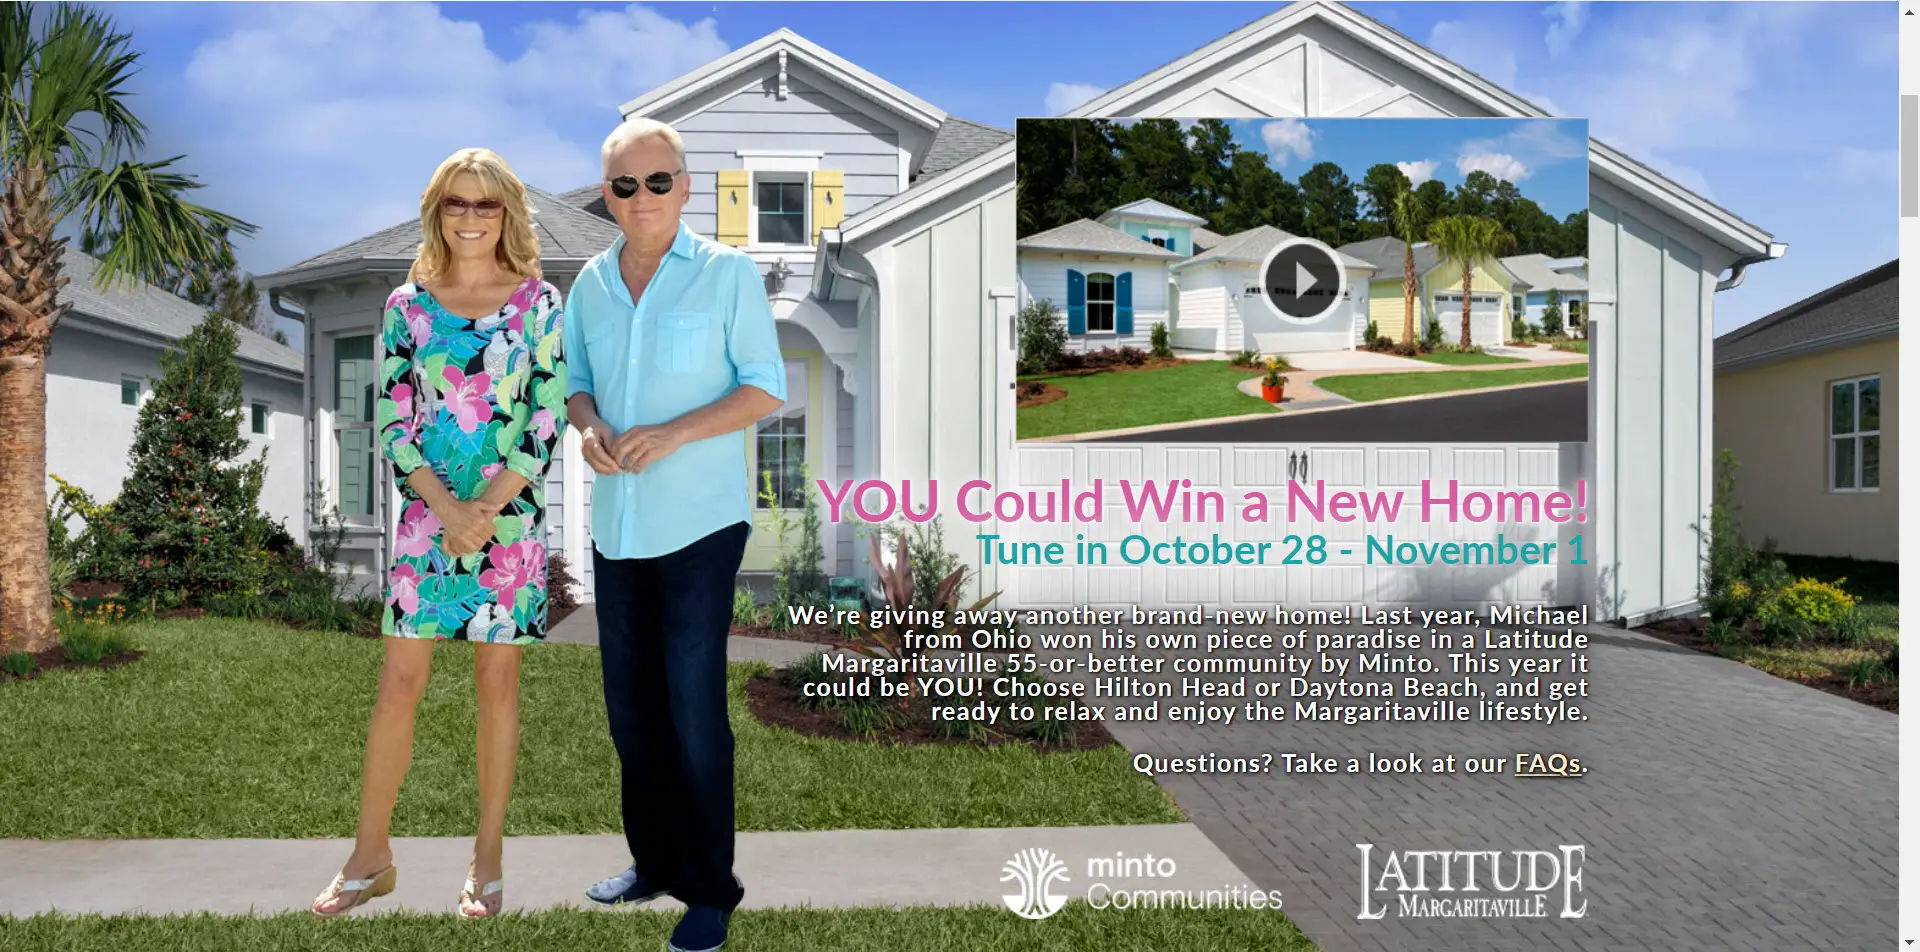 You could win a brand new Home from Wheel of Fortune. Grab today's code and enter to win! #WOF is giving away another brand-new home in the Latitude Margaritaville Community in Florida! Last year, Michael from Ohio won his own piece of paradise in a Latitude Margaritaville 55-or-better community by Minto. This year it could be YOU! Choose Hilton Head or Daytona Beach, and get ready to relax and enjoy the Margaritaville lifestyle.